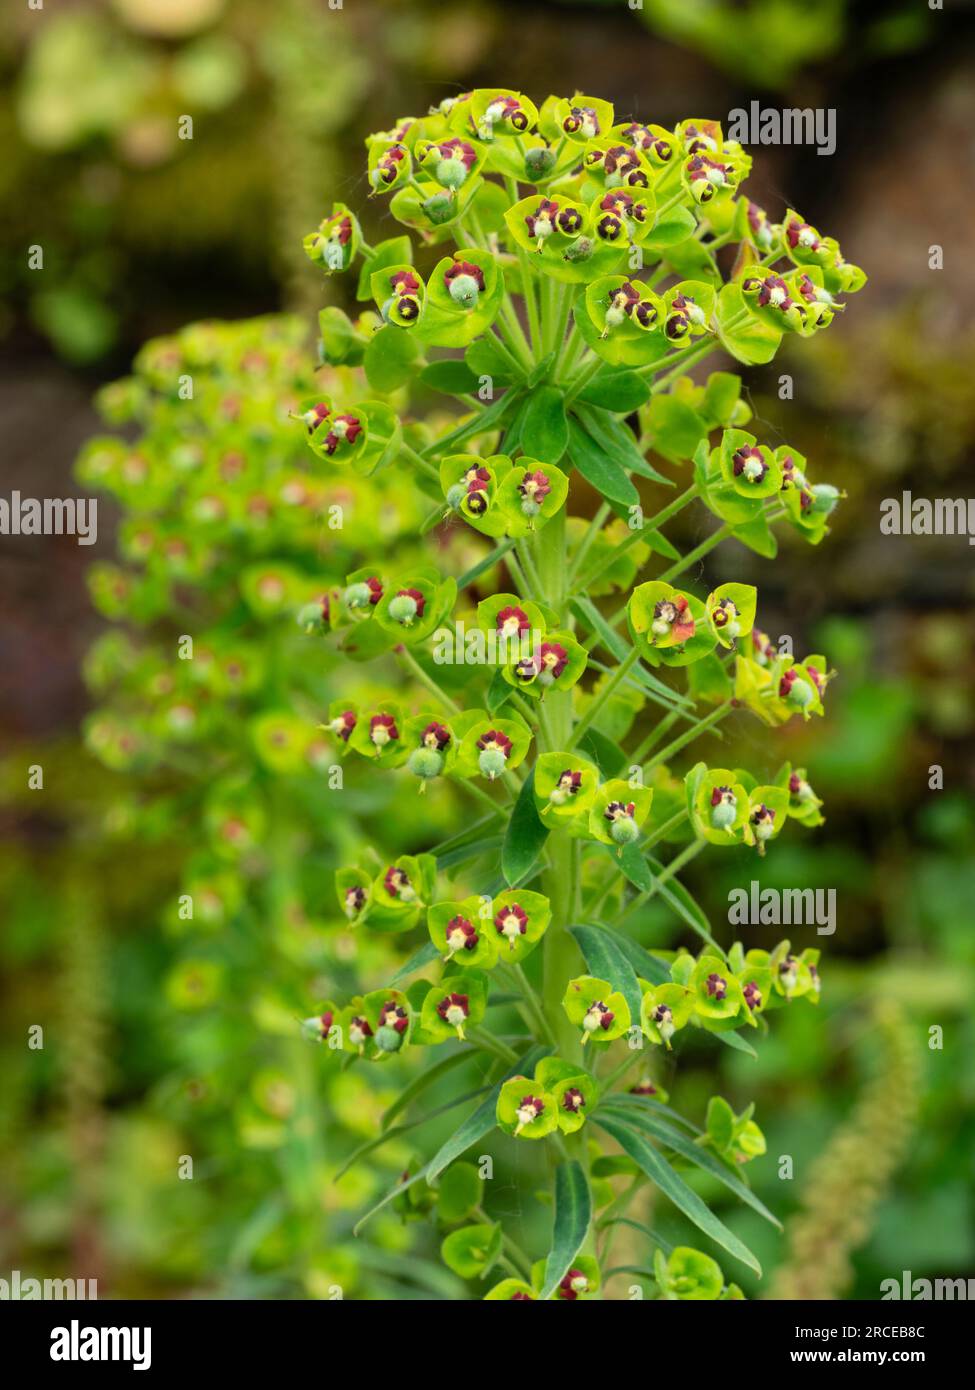 Spring flower spike with red flowers among green bracts of the evergreen sub shrub, Euphorbia x martinii Stock Photo